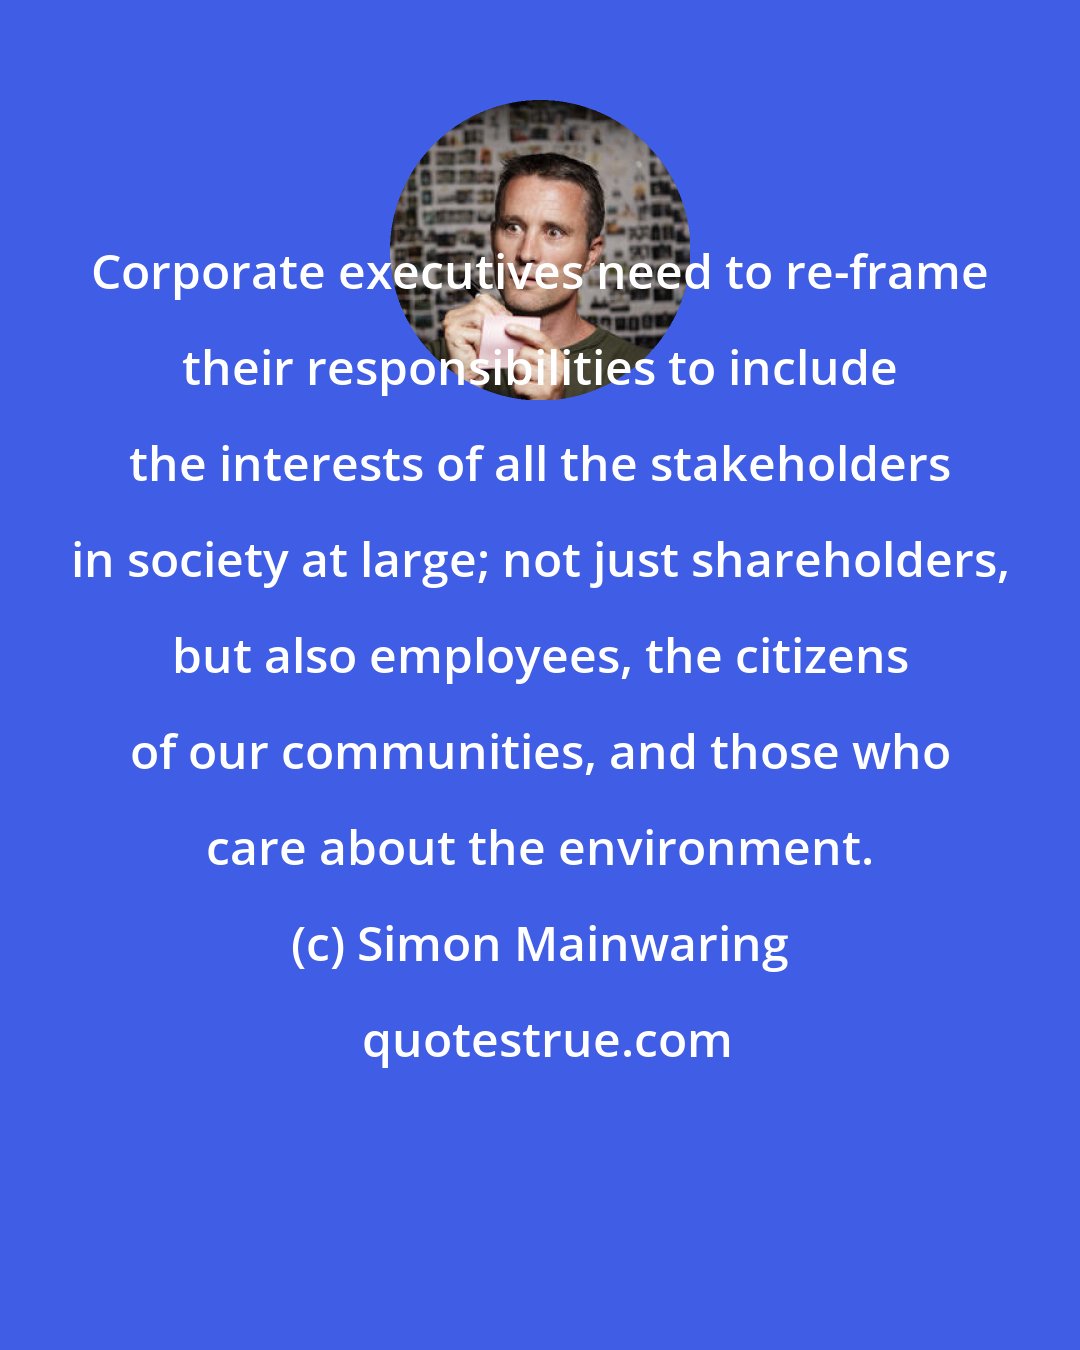 Simon Mainwaring: Corporate executives need to re-frame their responsibilities to include the interests of all the stakeholders in society at large; not just shareholders, but also employees, the citizens of our communities, and those who care about the environment.